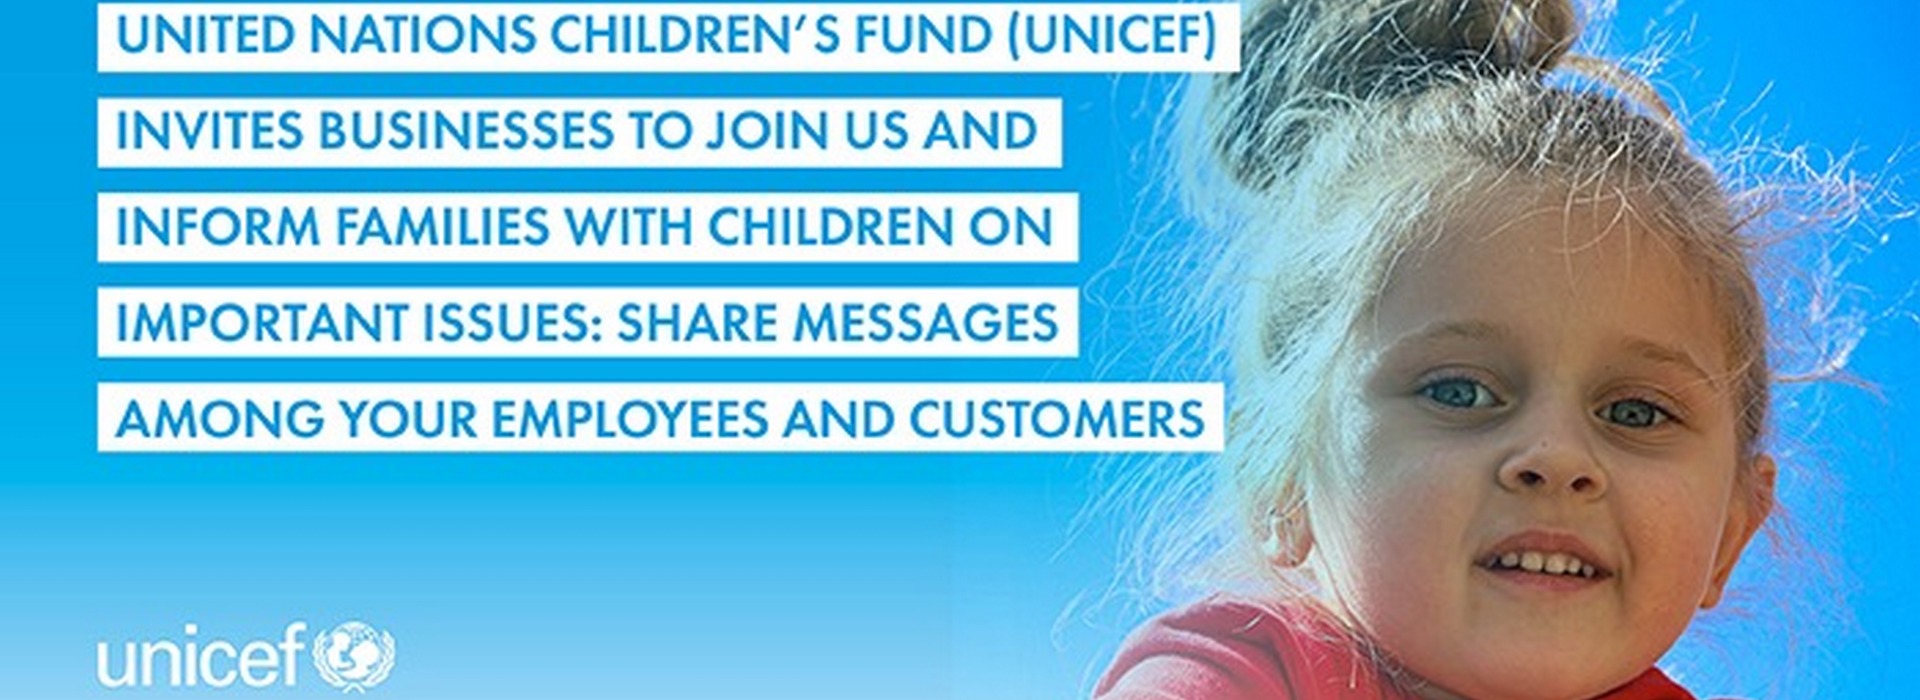 Business Community Boosts UNICEF Campaigns